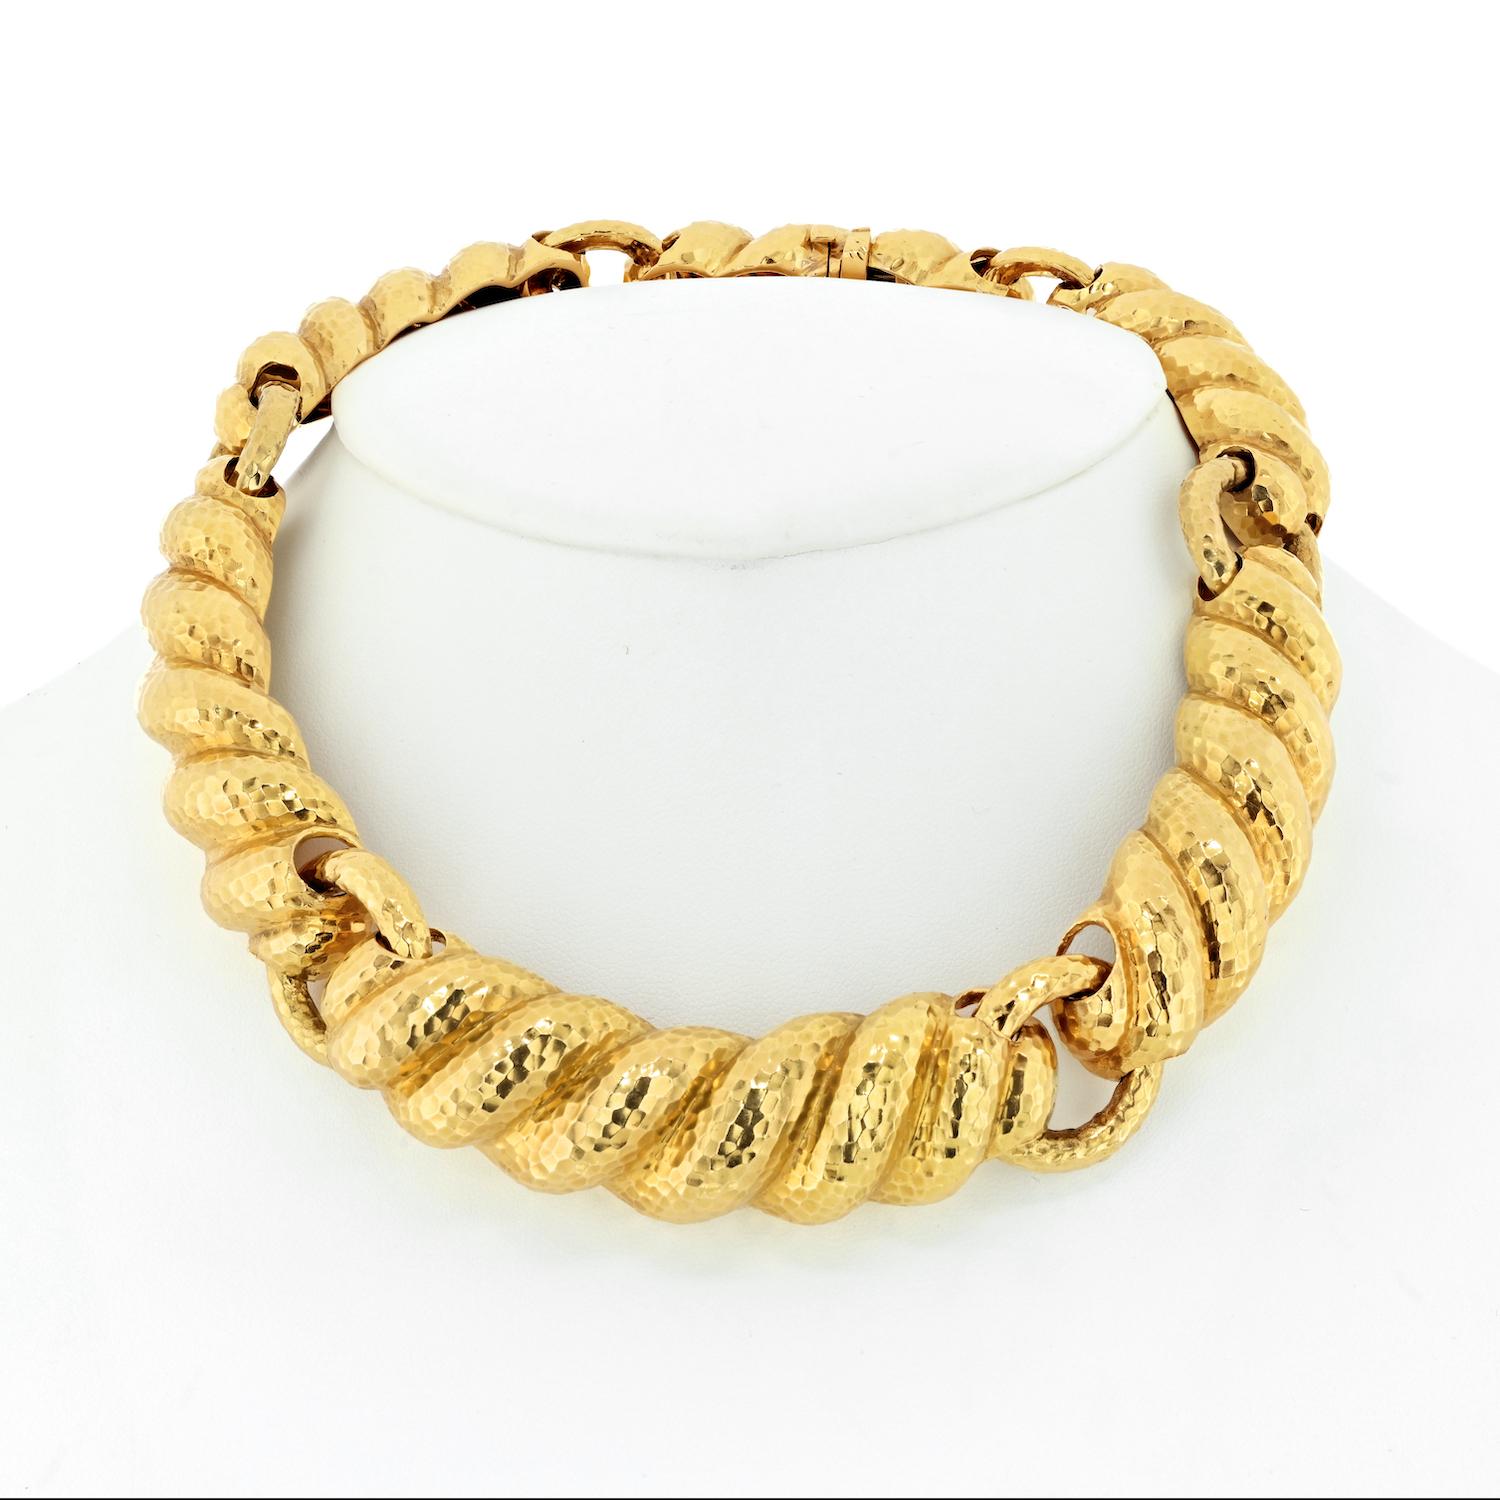 Marked by a bold geometric design, this 18K yellow gold necklace by David Webb makes a fashionable statement. Its hand-hammered texture is a signature of the New York-based designer, symbolizing the uniqueness and hand-executed artistry of David